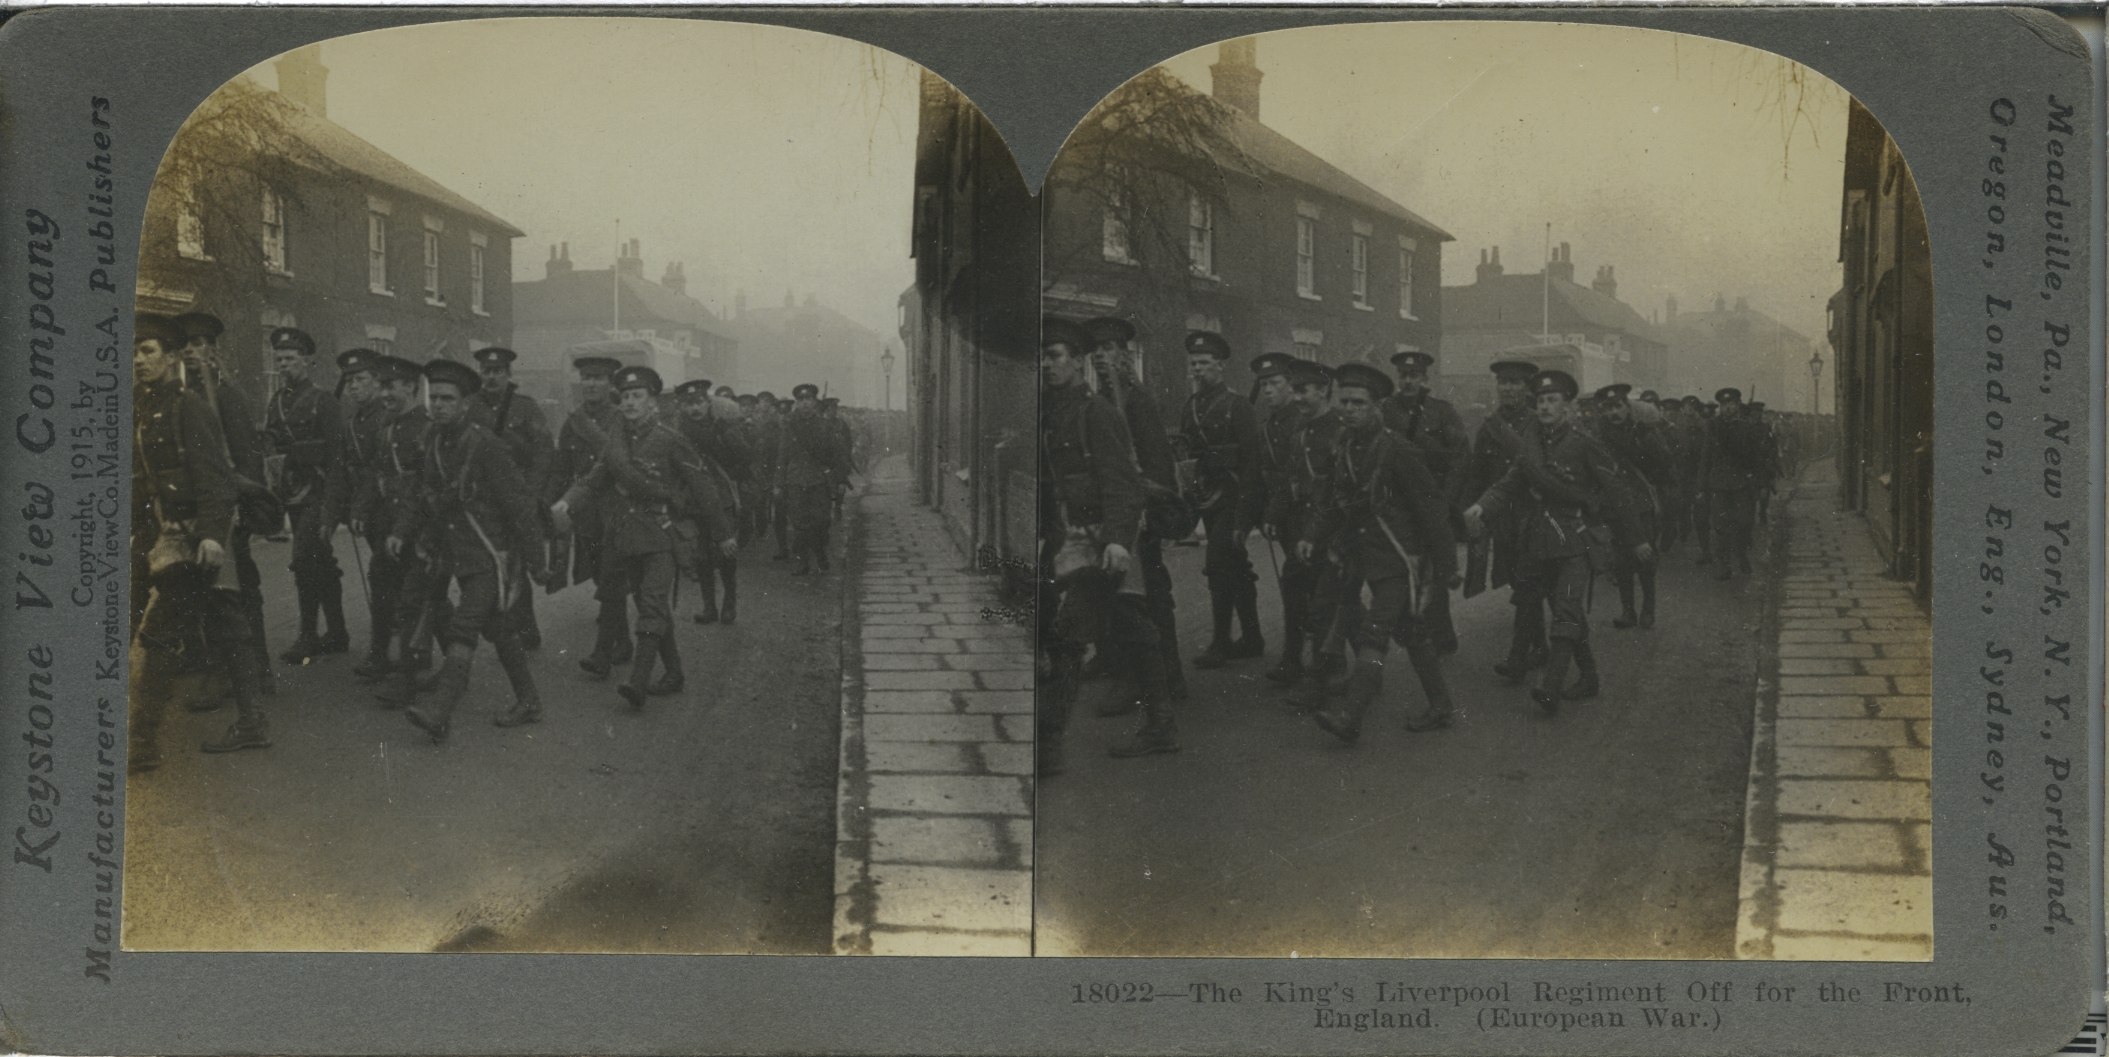 The King's Liverpool Regiment Off for the Front, England. (European War.)